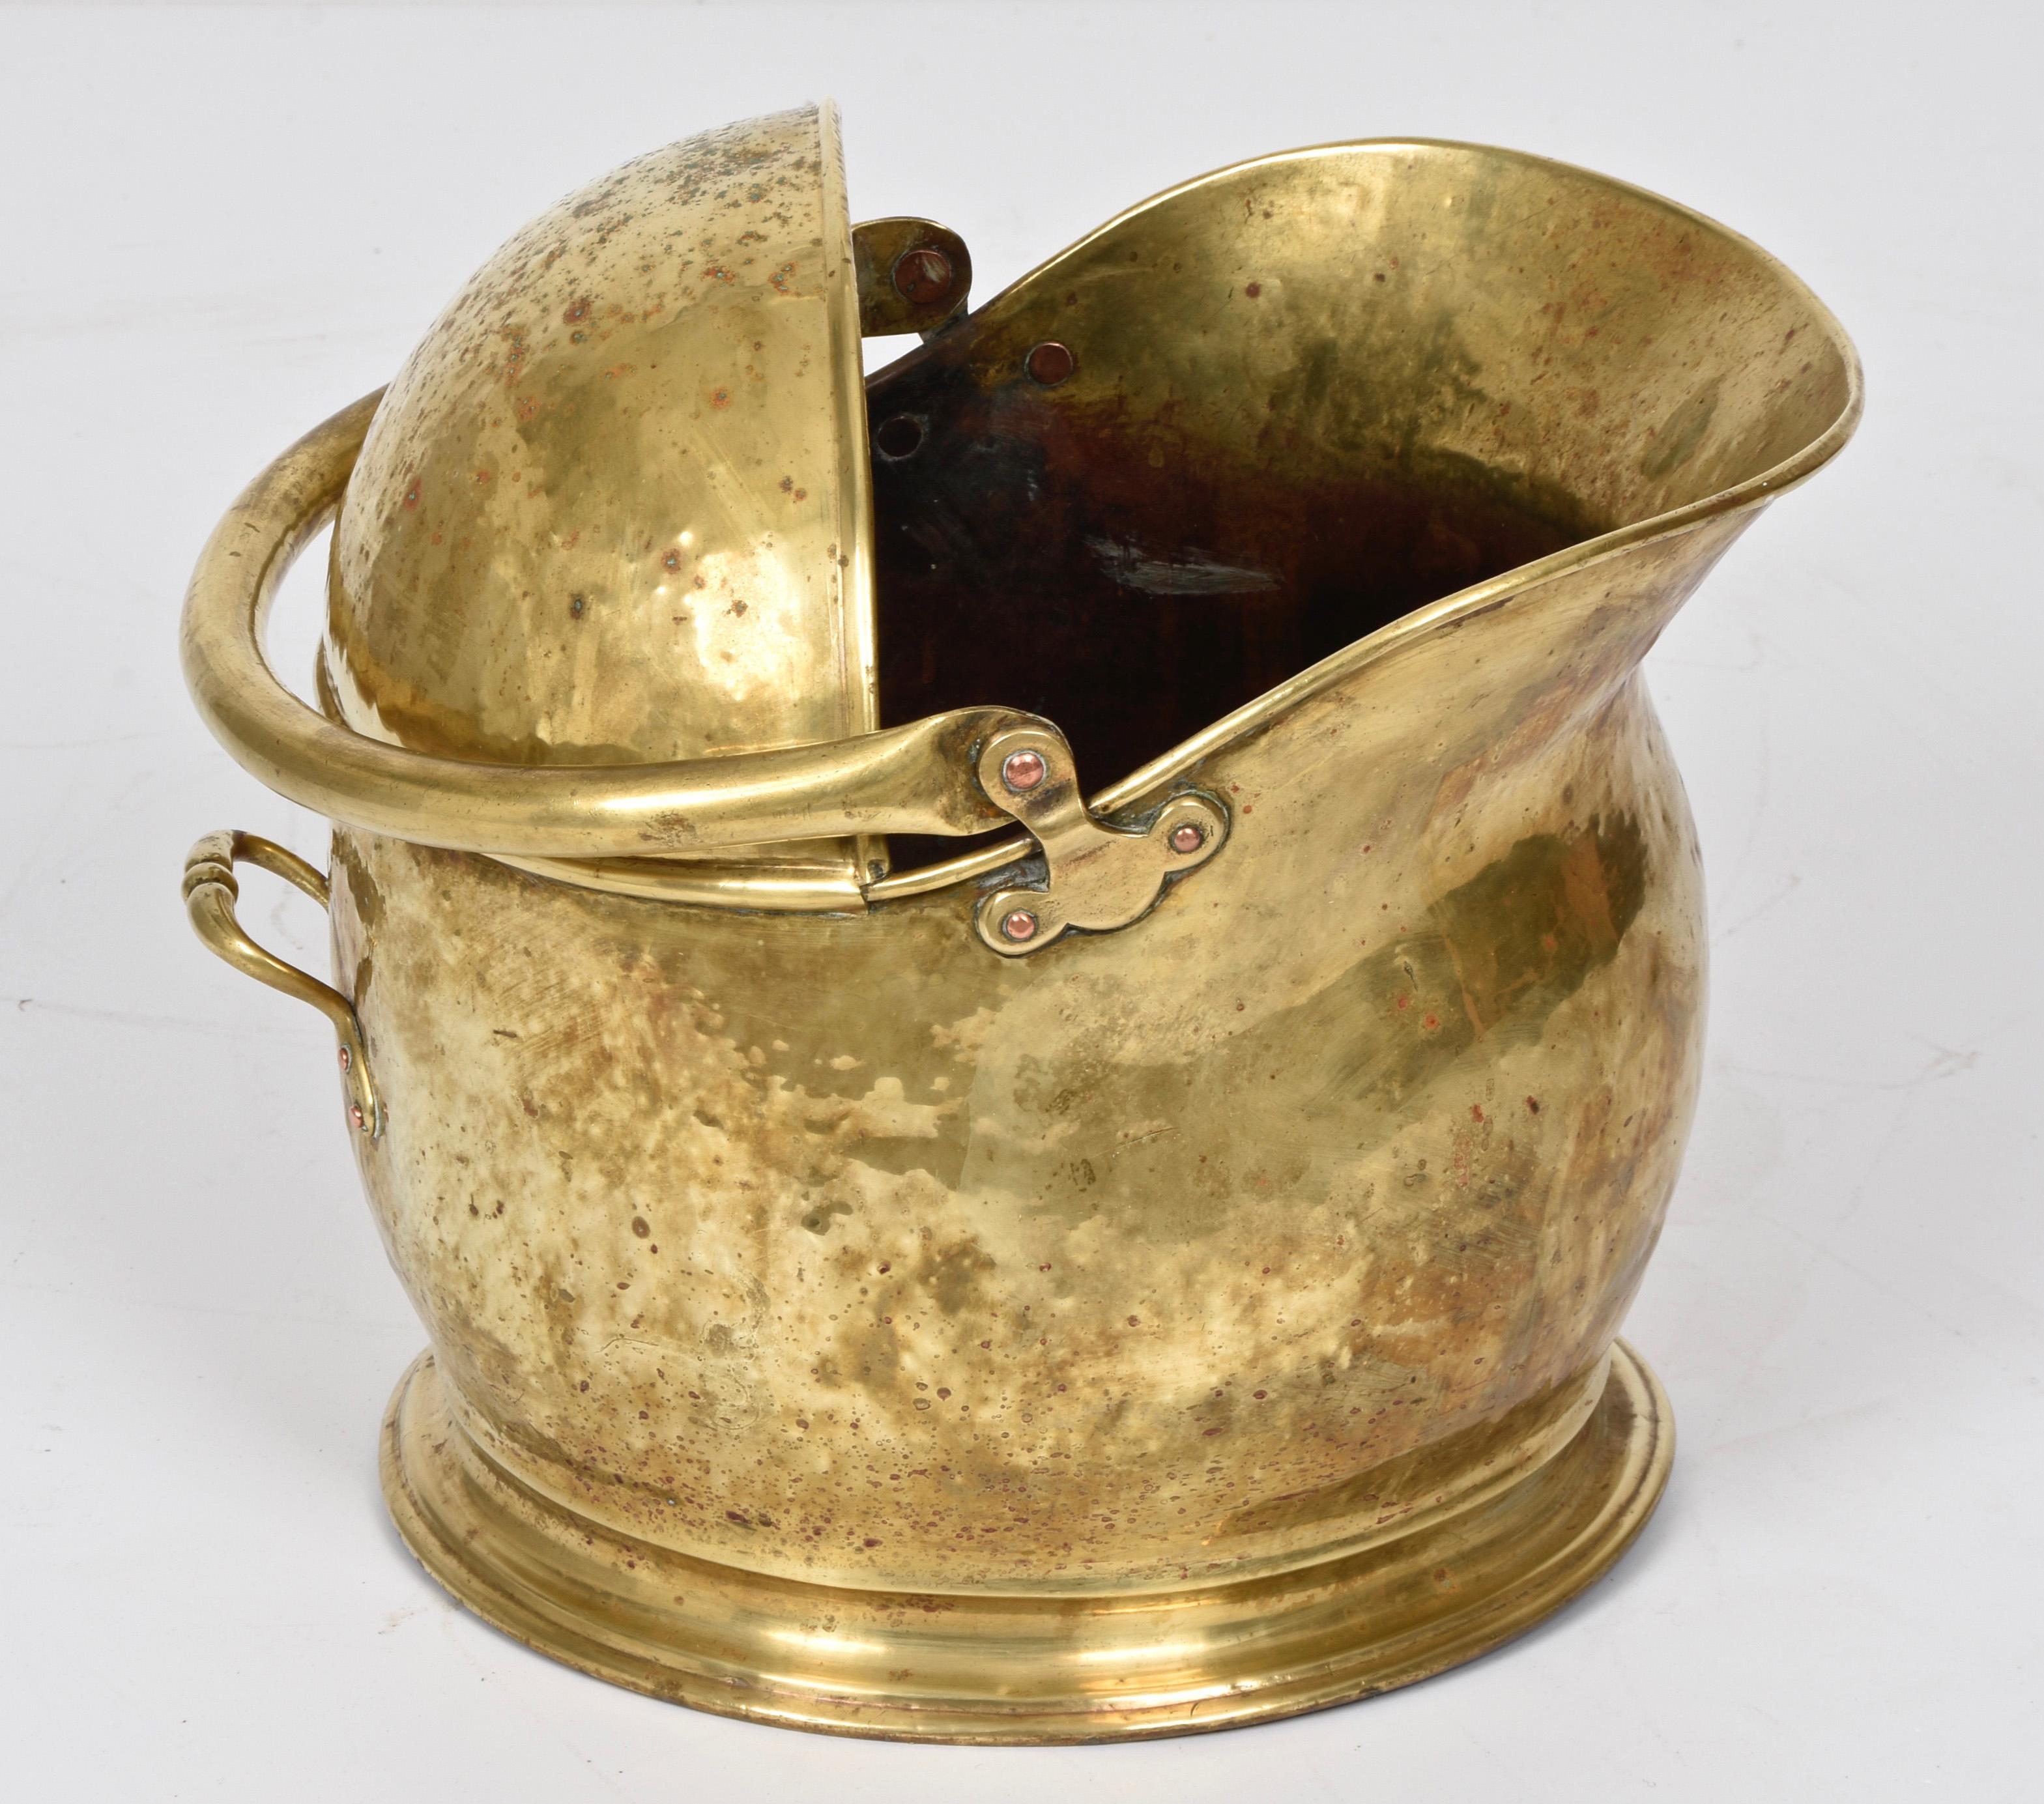 Stunning brass charcoal scuttle in the shape of a wonderful helmet. This amazing piece was designed in Italy in the 1930s.

This piece is unique in that it is shaped like a wonderful helmet with an incredible handle. Solid brass is gorgeous, hand